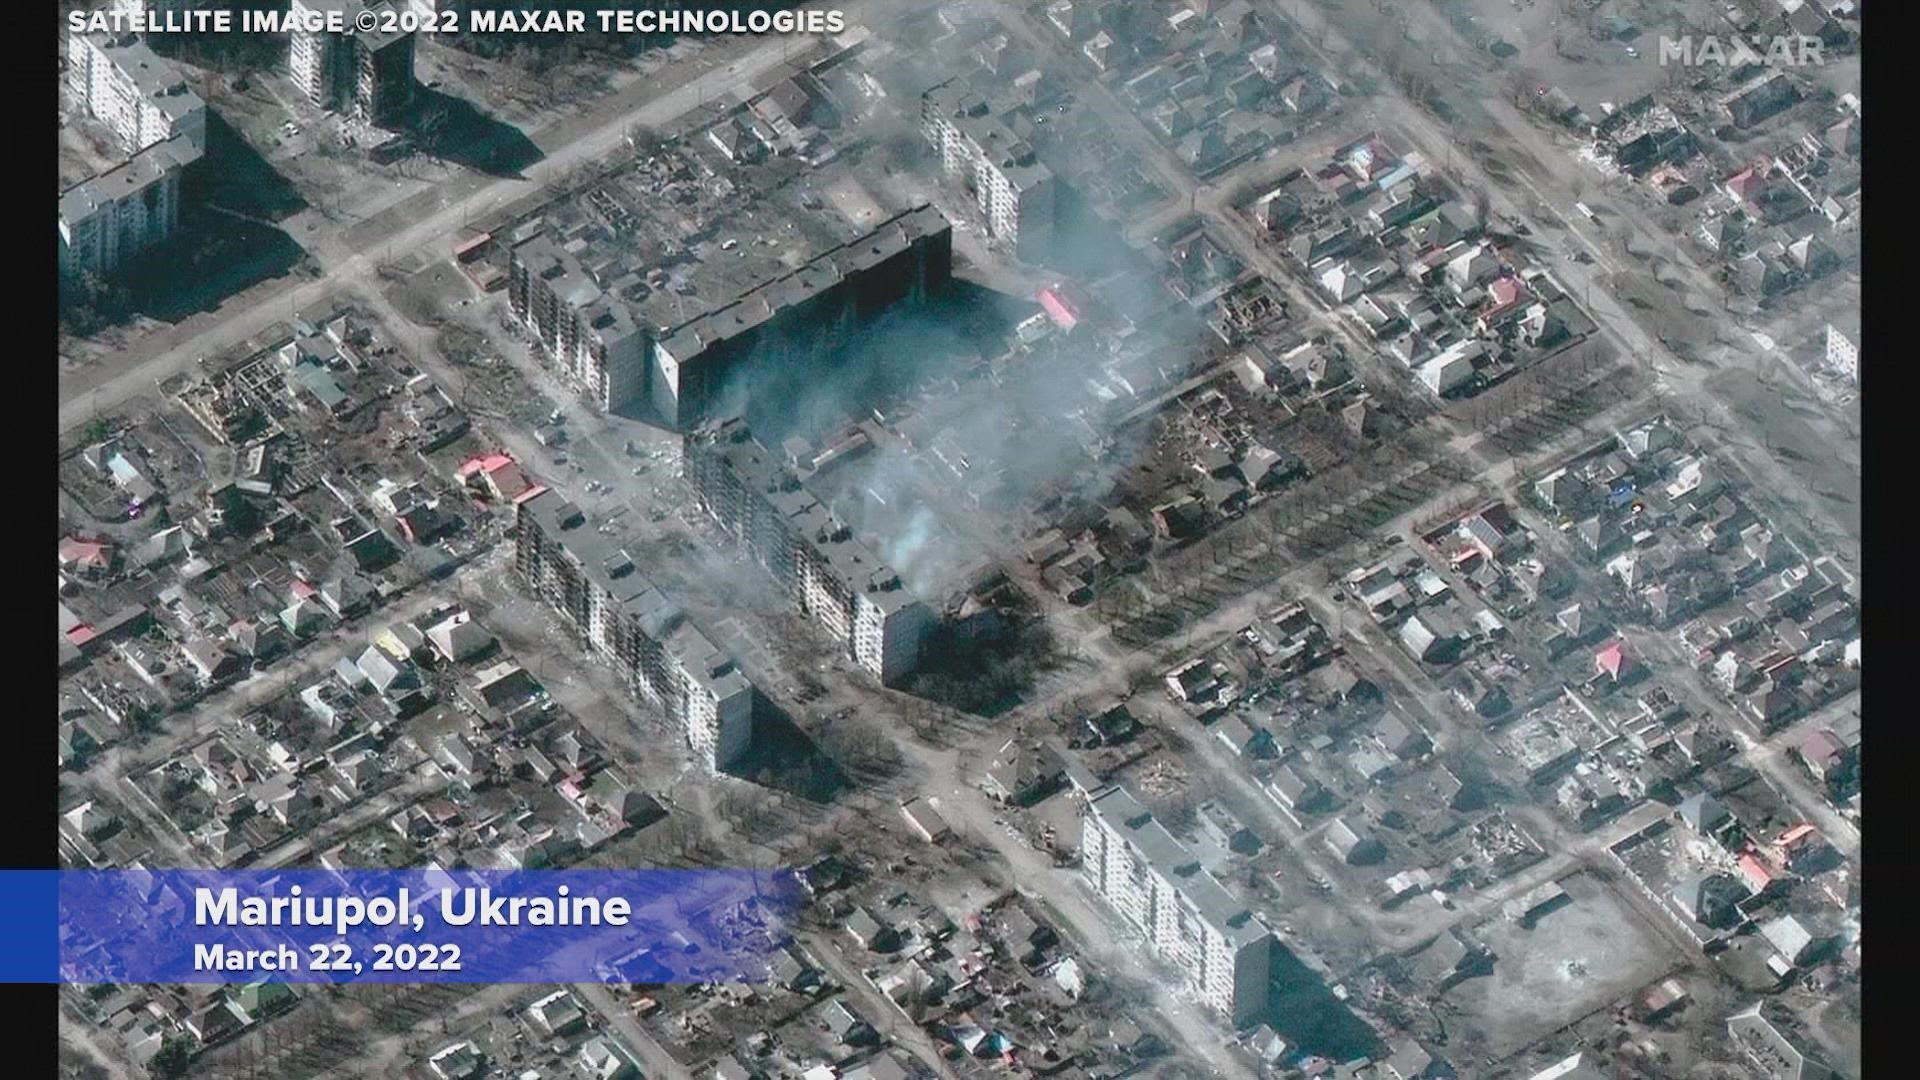 Satellite imagery from Tuesday revealed further destruction in the besieged Ukrainian city of Mariupol.